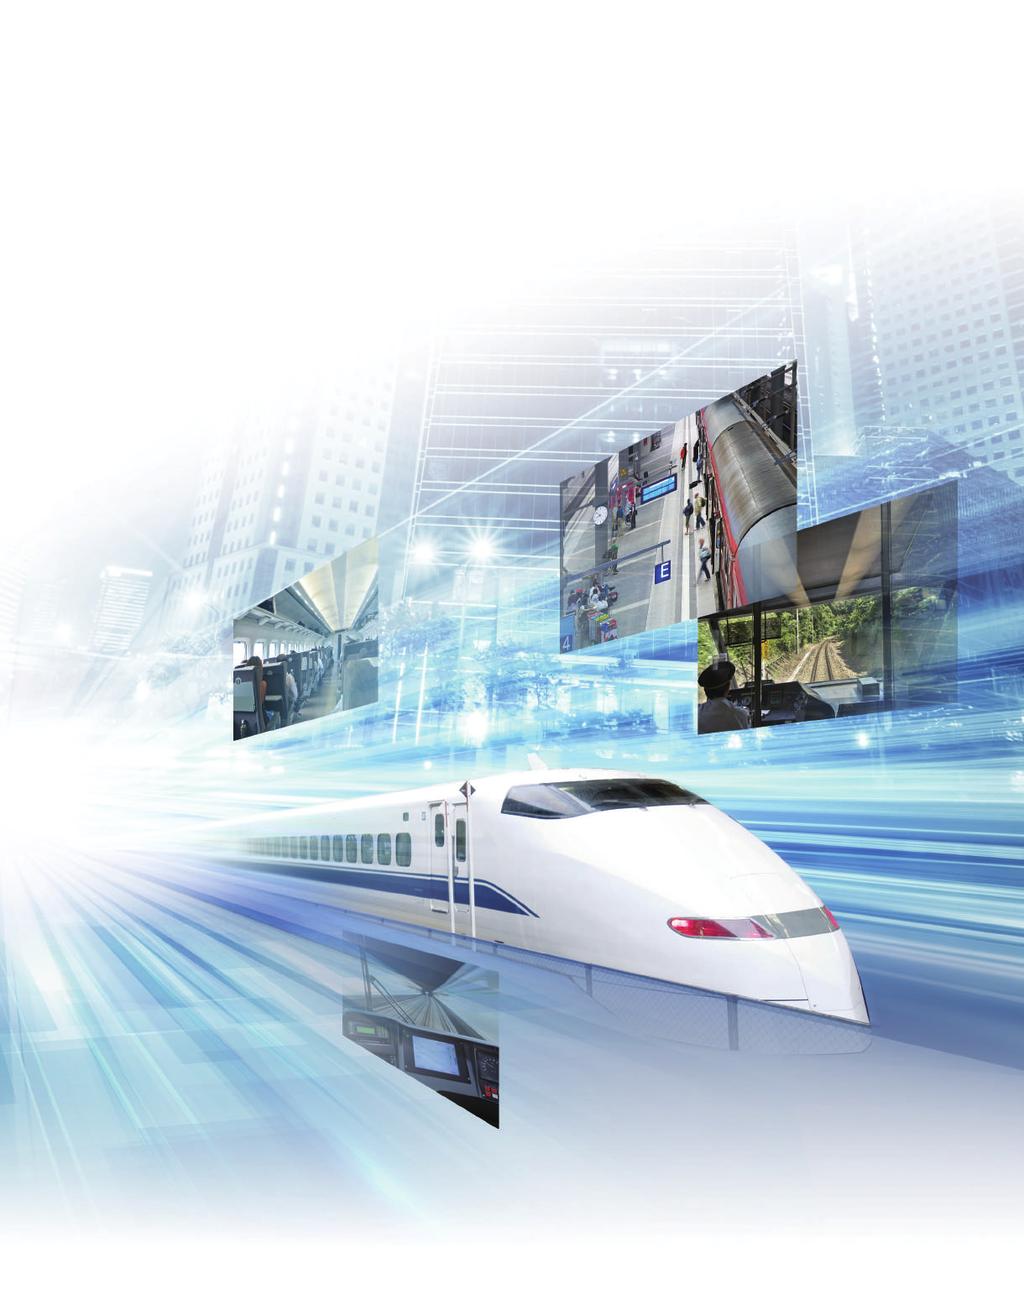 Modernized Rolling Stock Solution for Railway Infrastructure System Modularized design for railway solutions CCTV